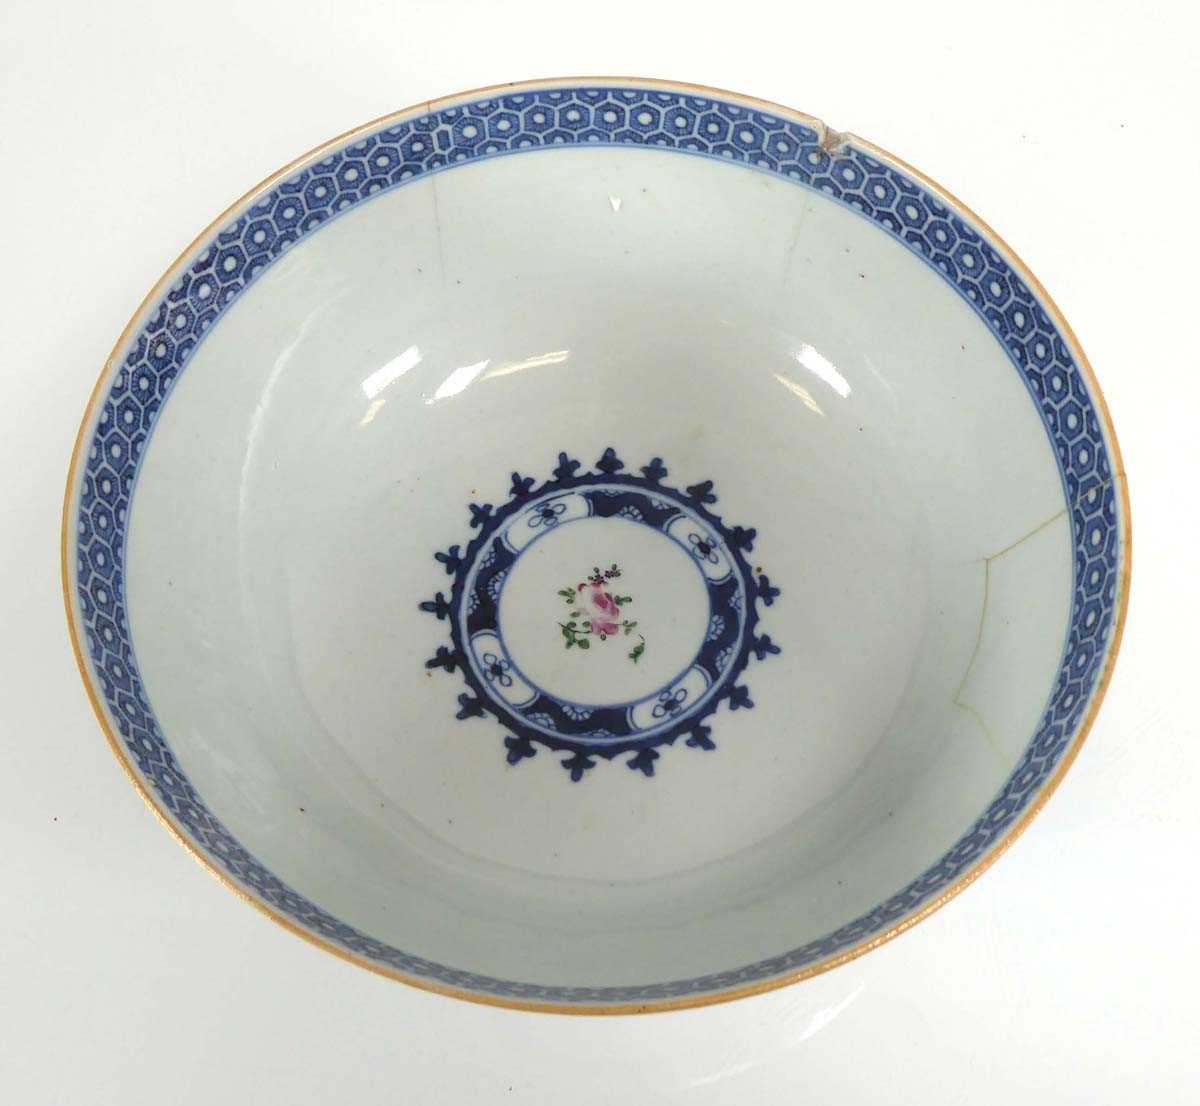 A Chinese Export fruit bowl decorated with foliate motifs within blue and white borders, d. 23 cm ( - Image 2 of 7